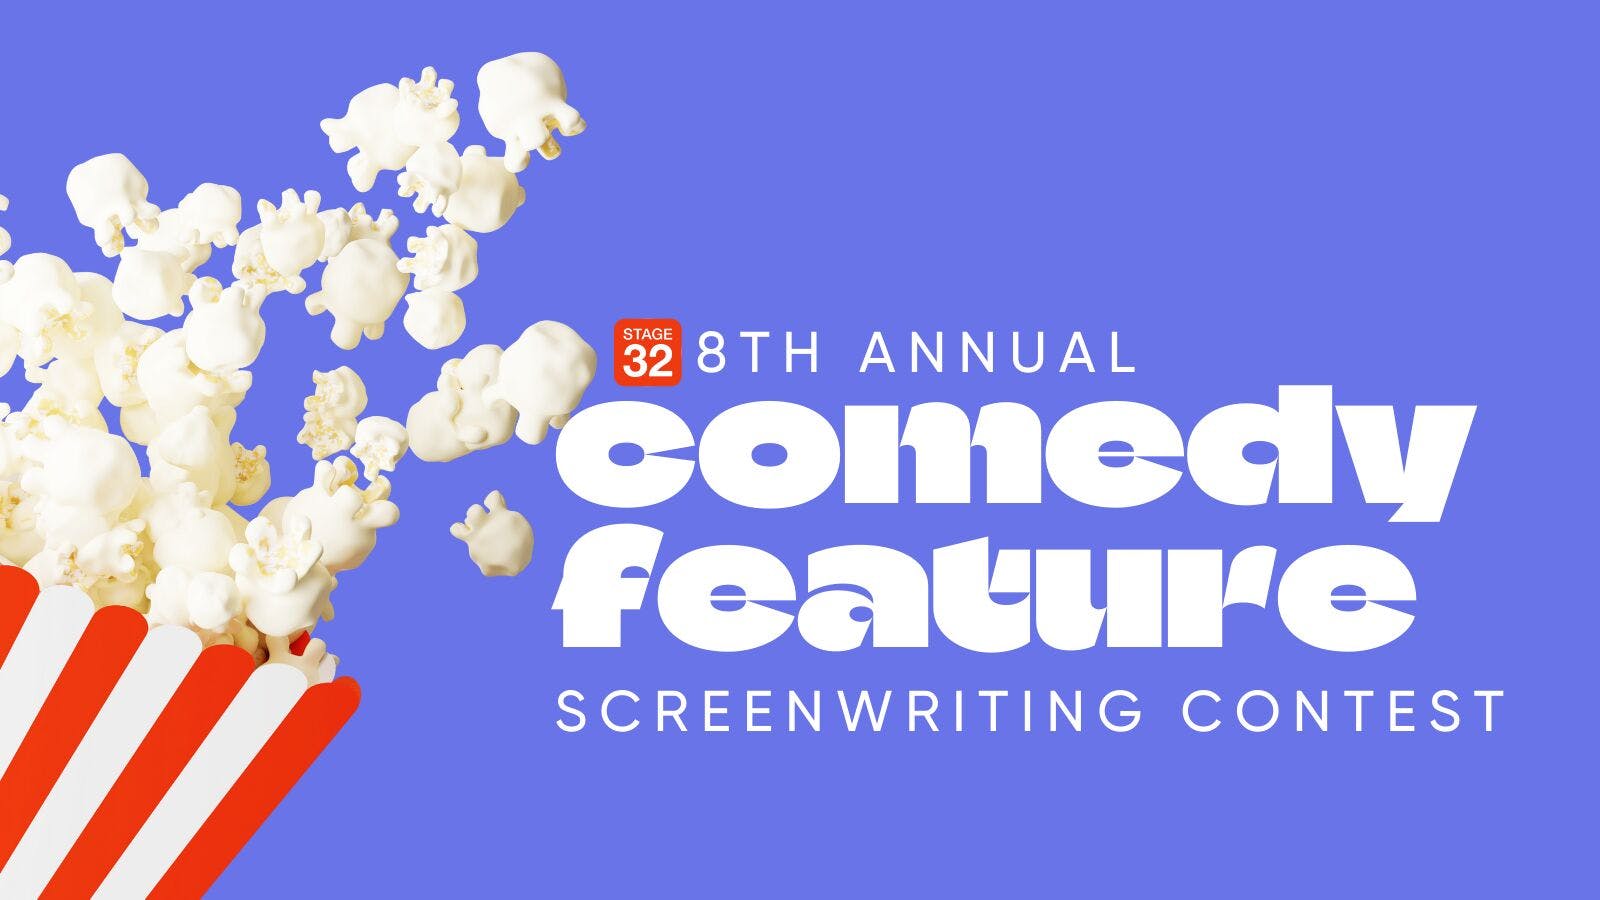 Announcing the 8th Annual Feature Comedy Screenwriting Contest